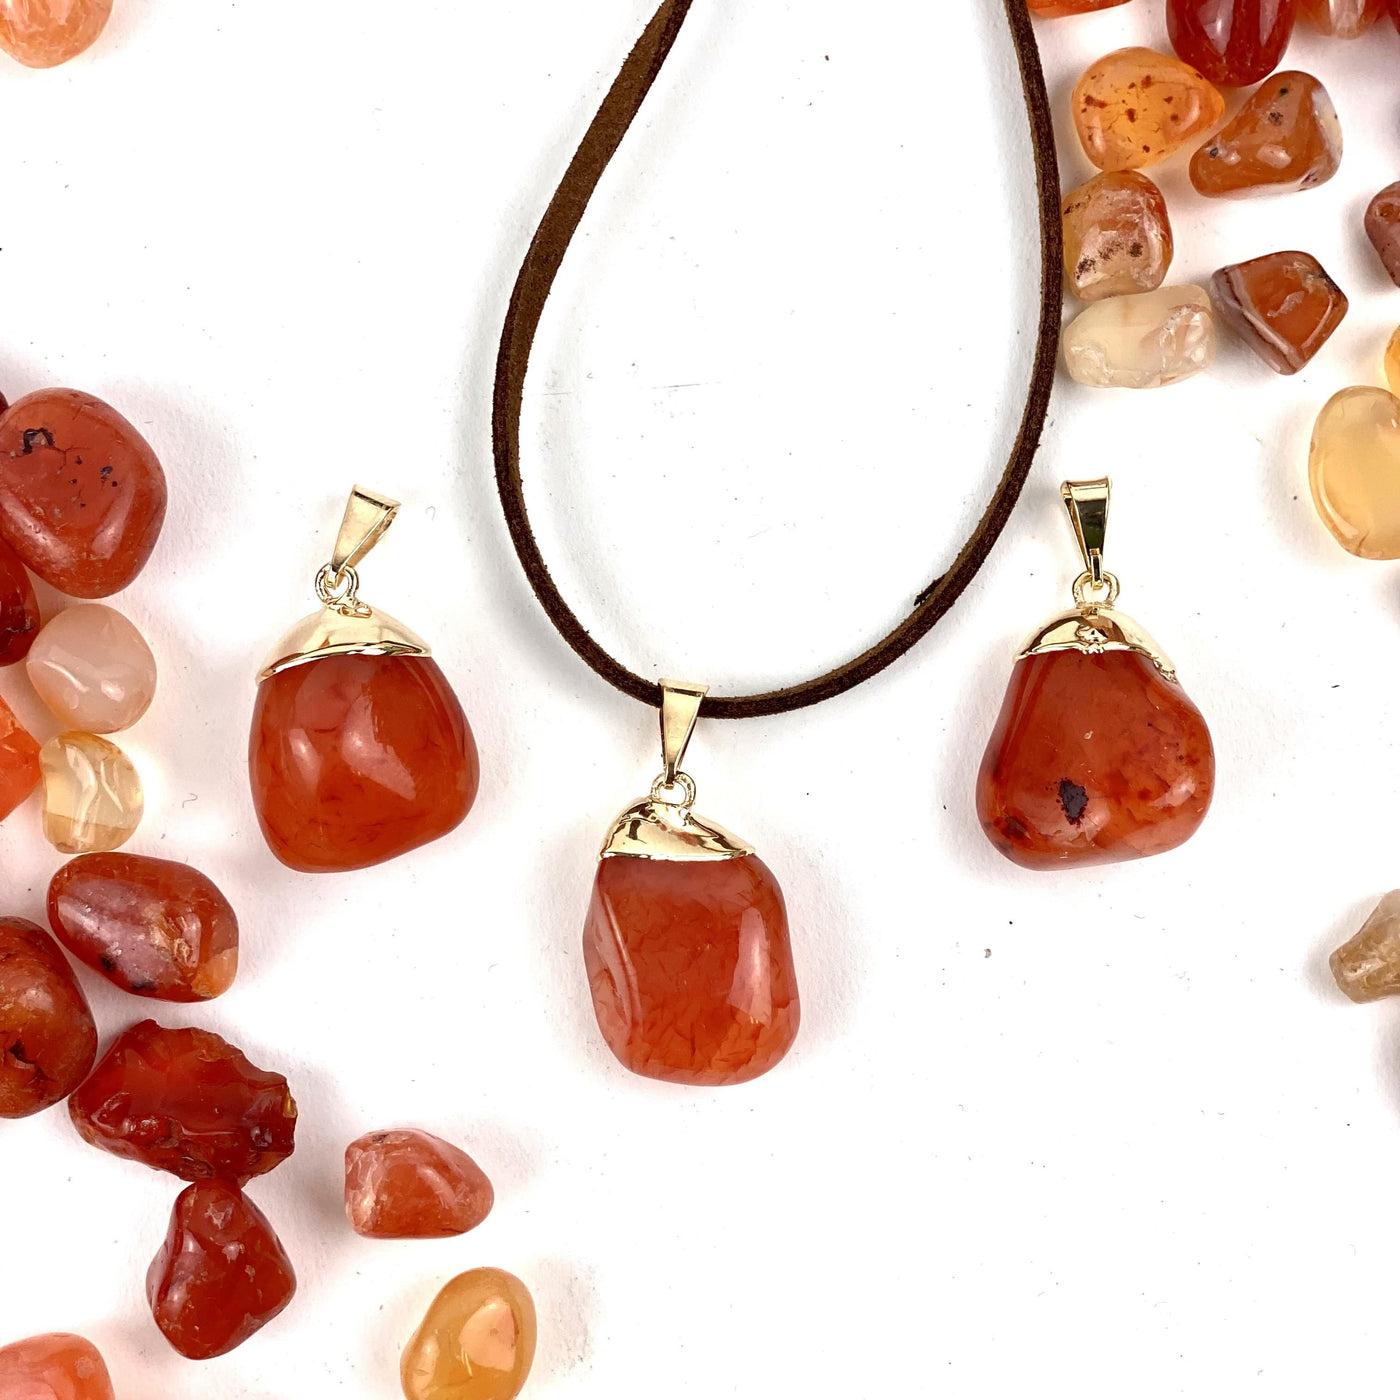 Tumbled Carnelian Pendant with Electroplated 24k Gold Cap on leather string with others on the background